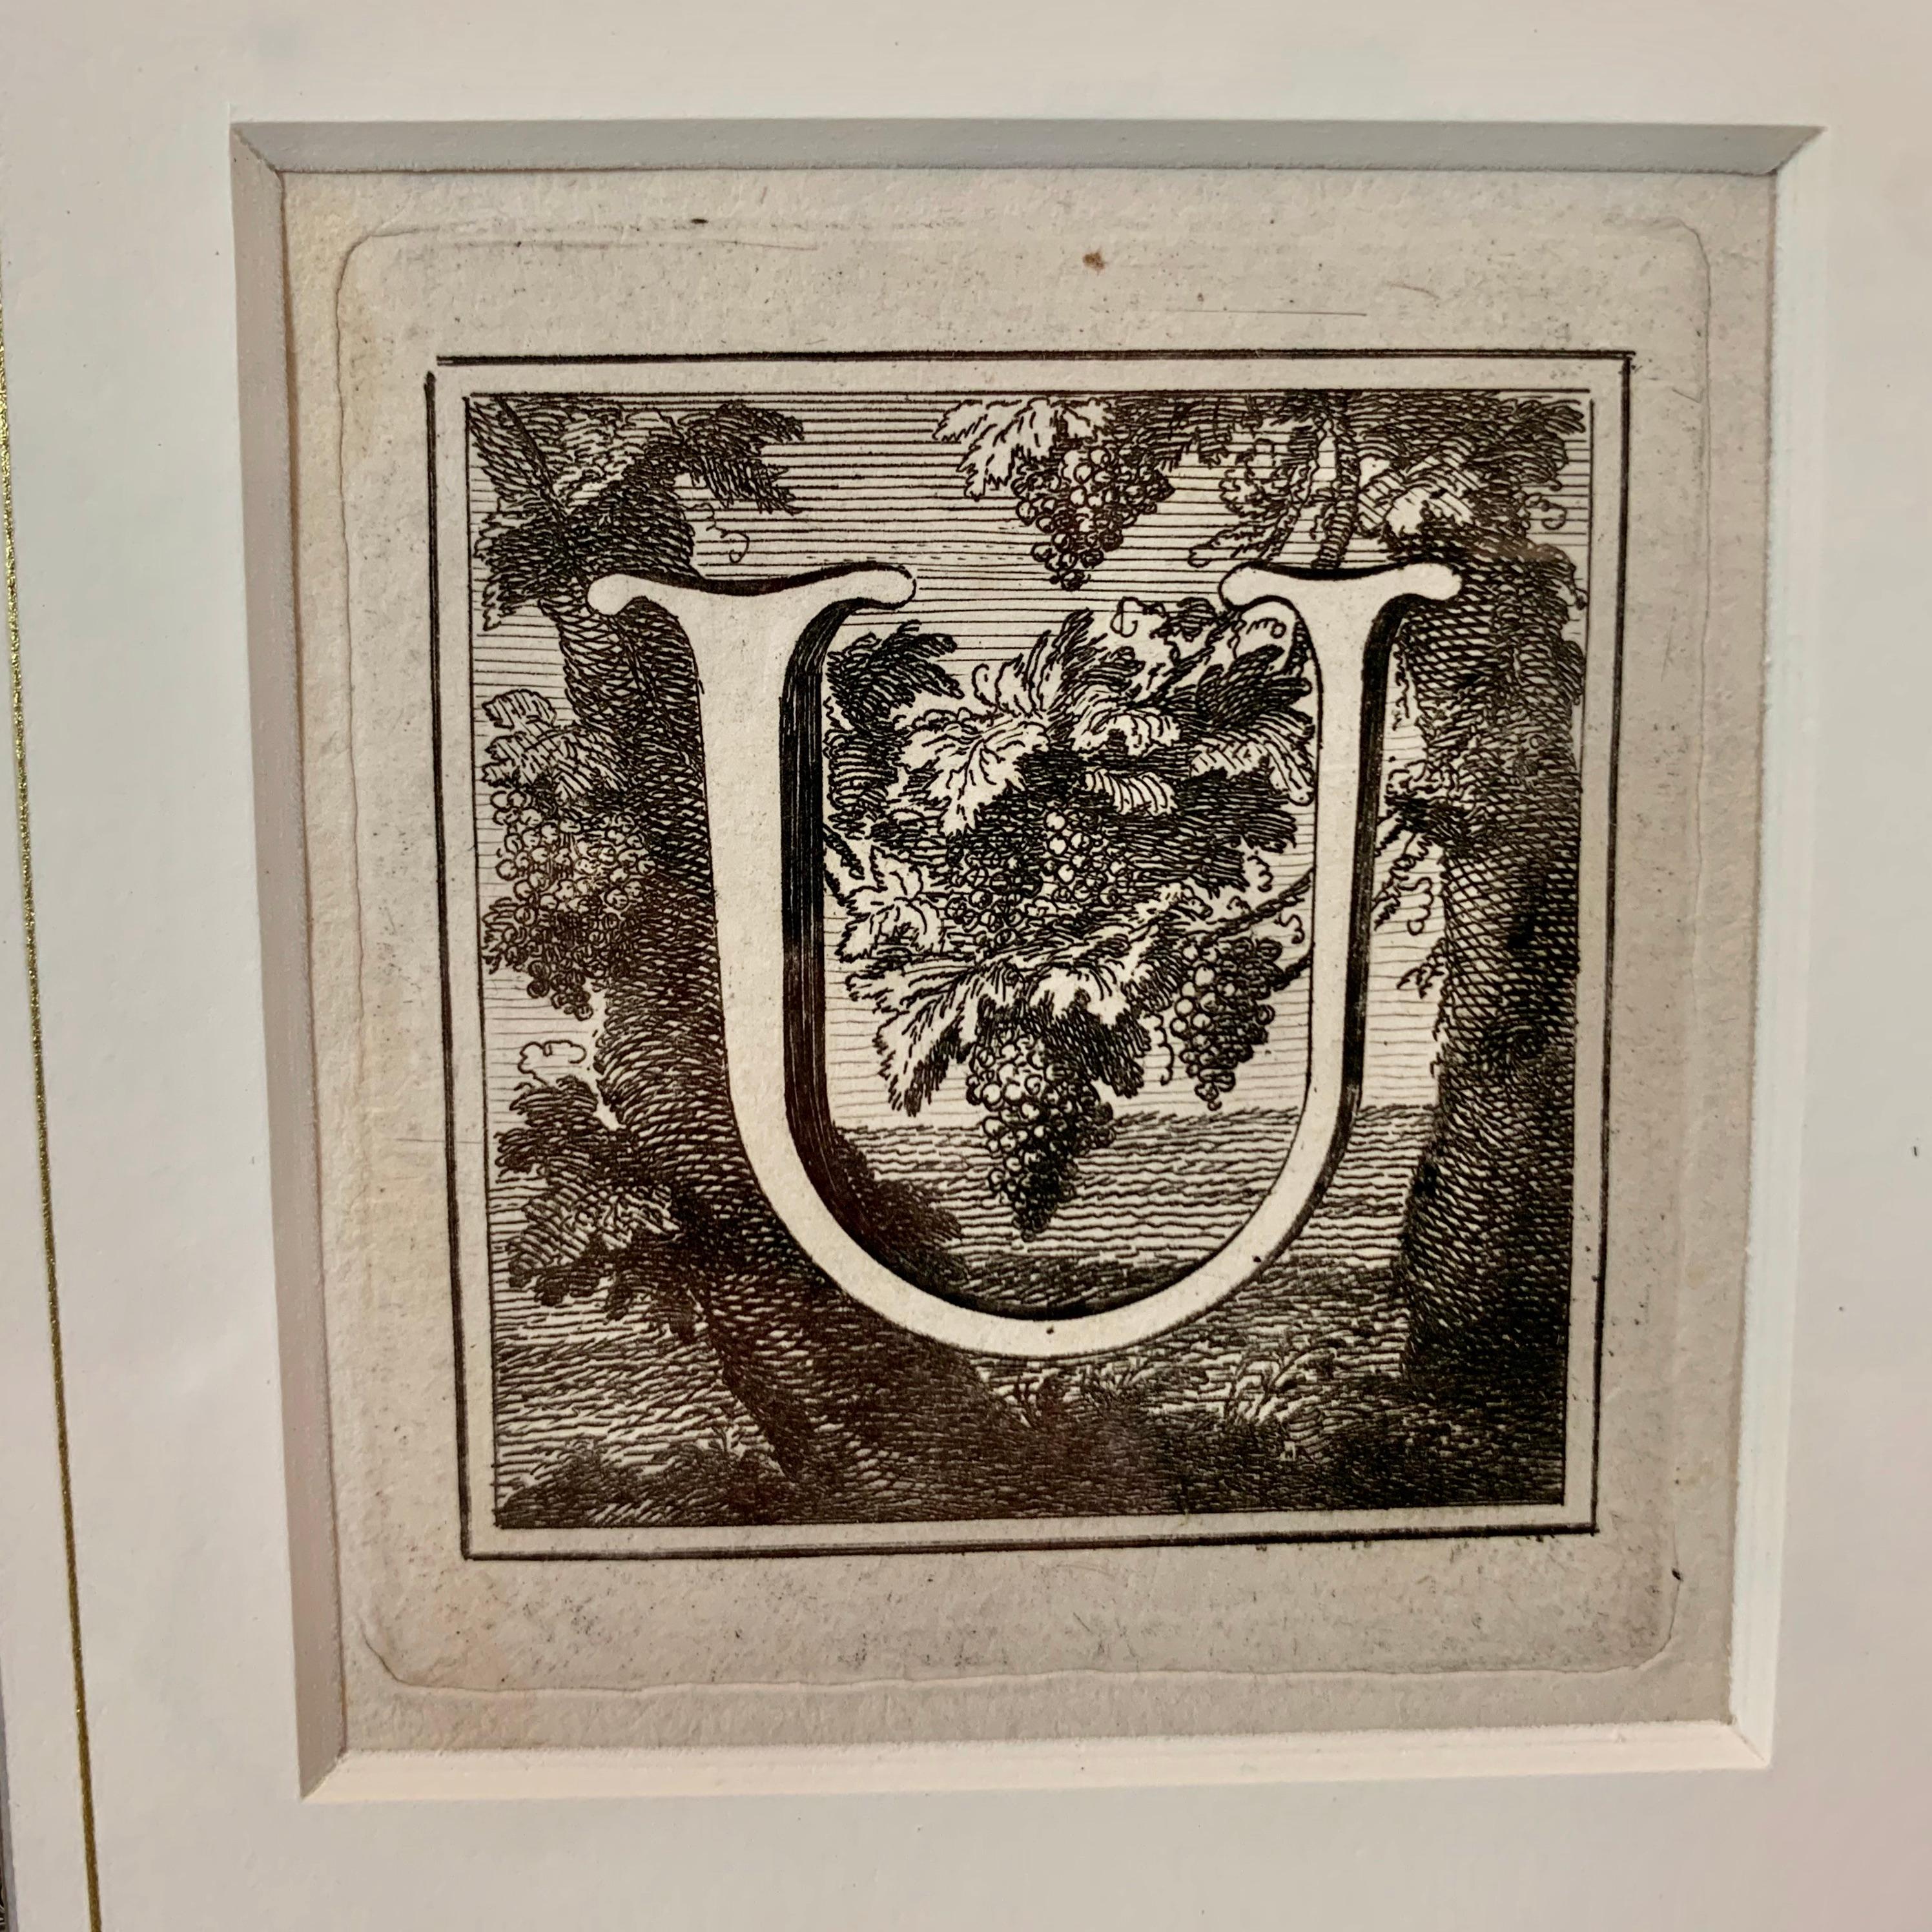 Neoclassical Engraving of the Letter 